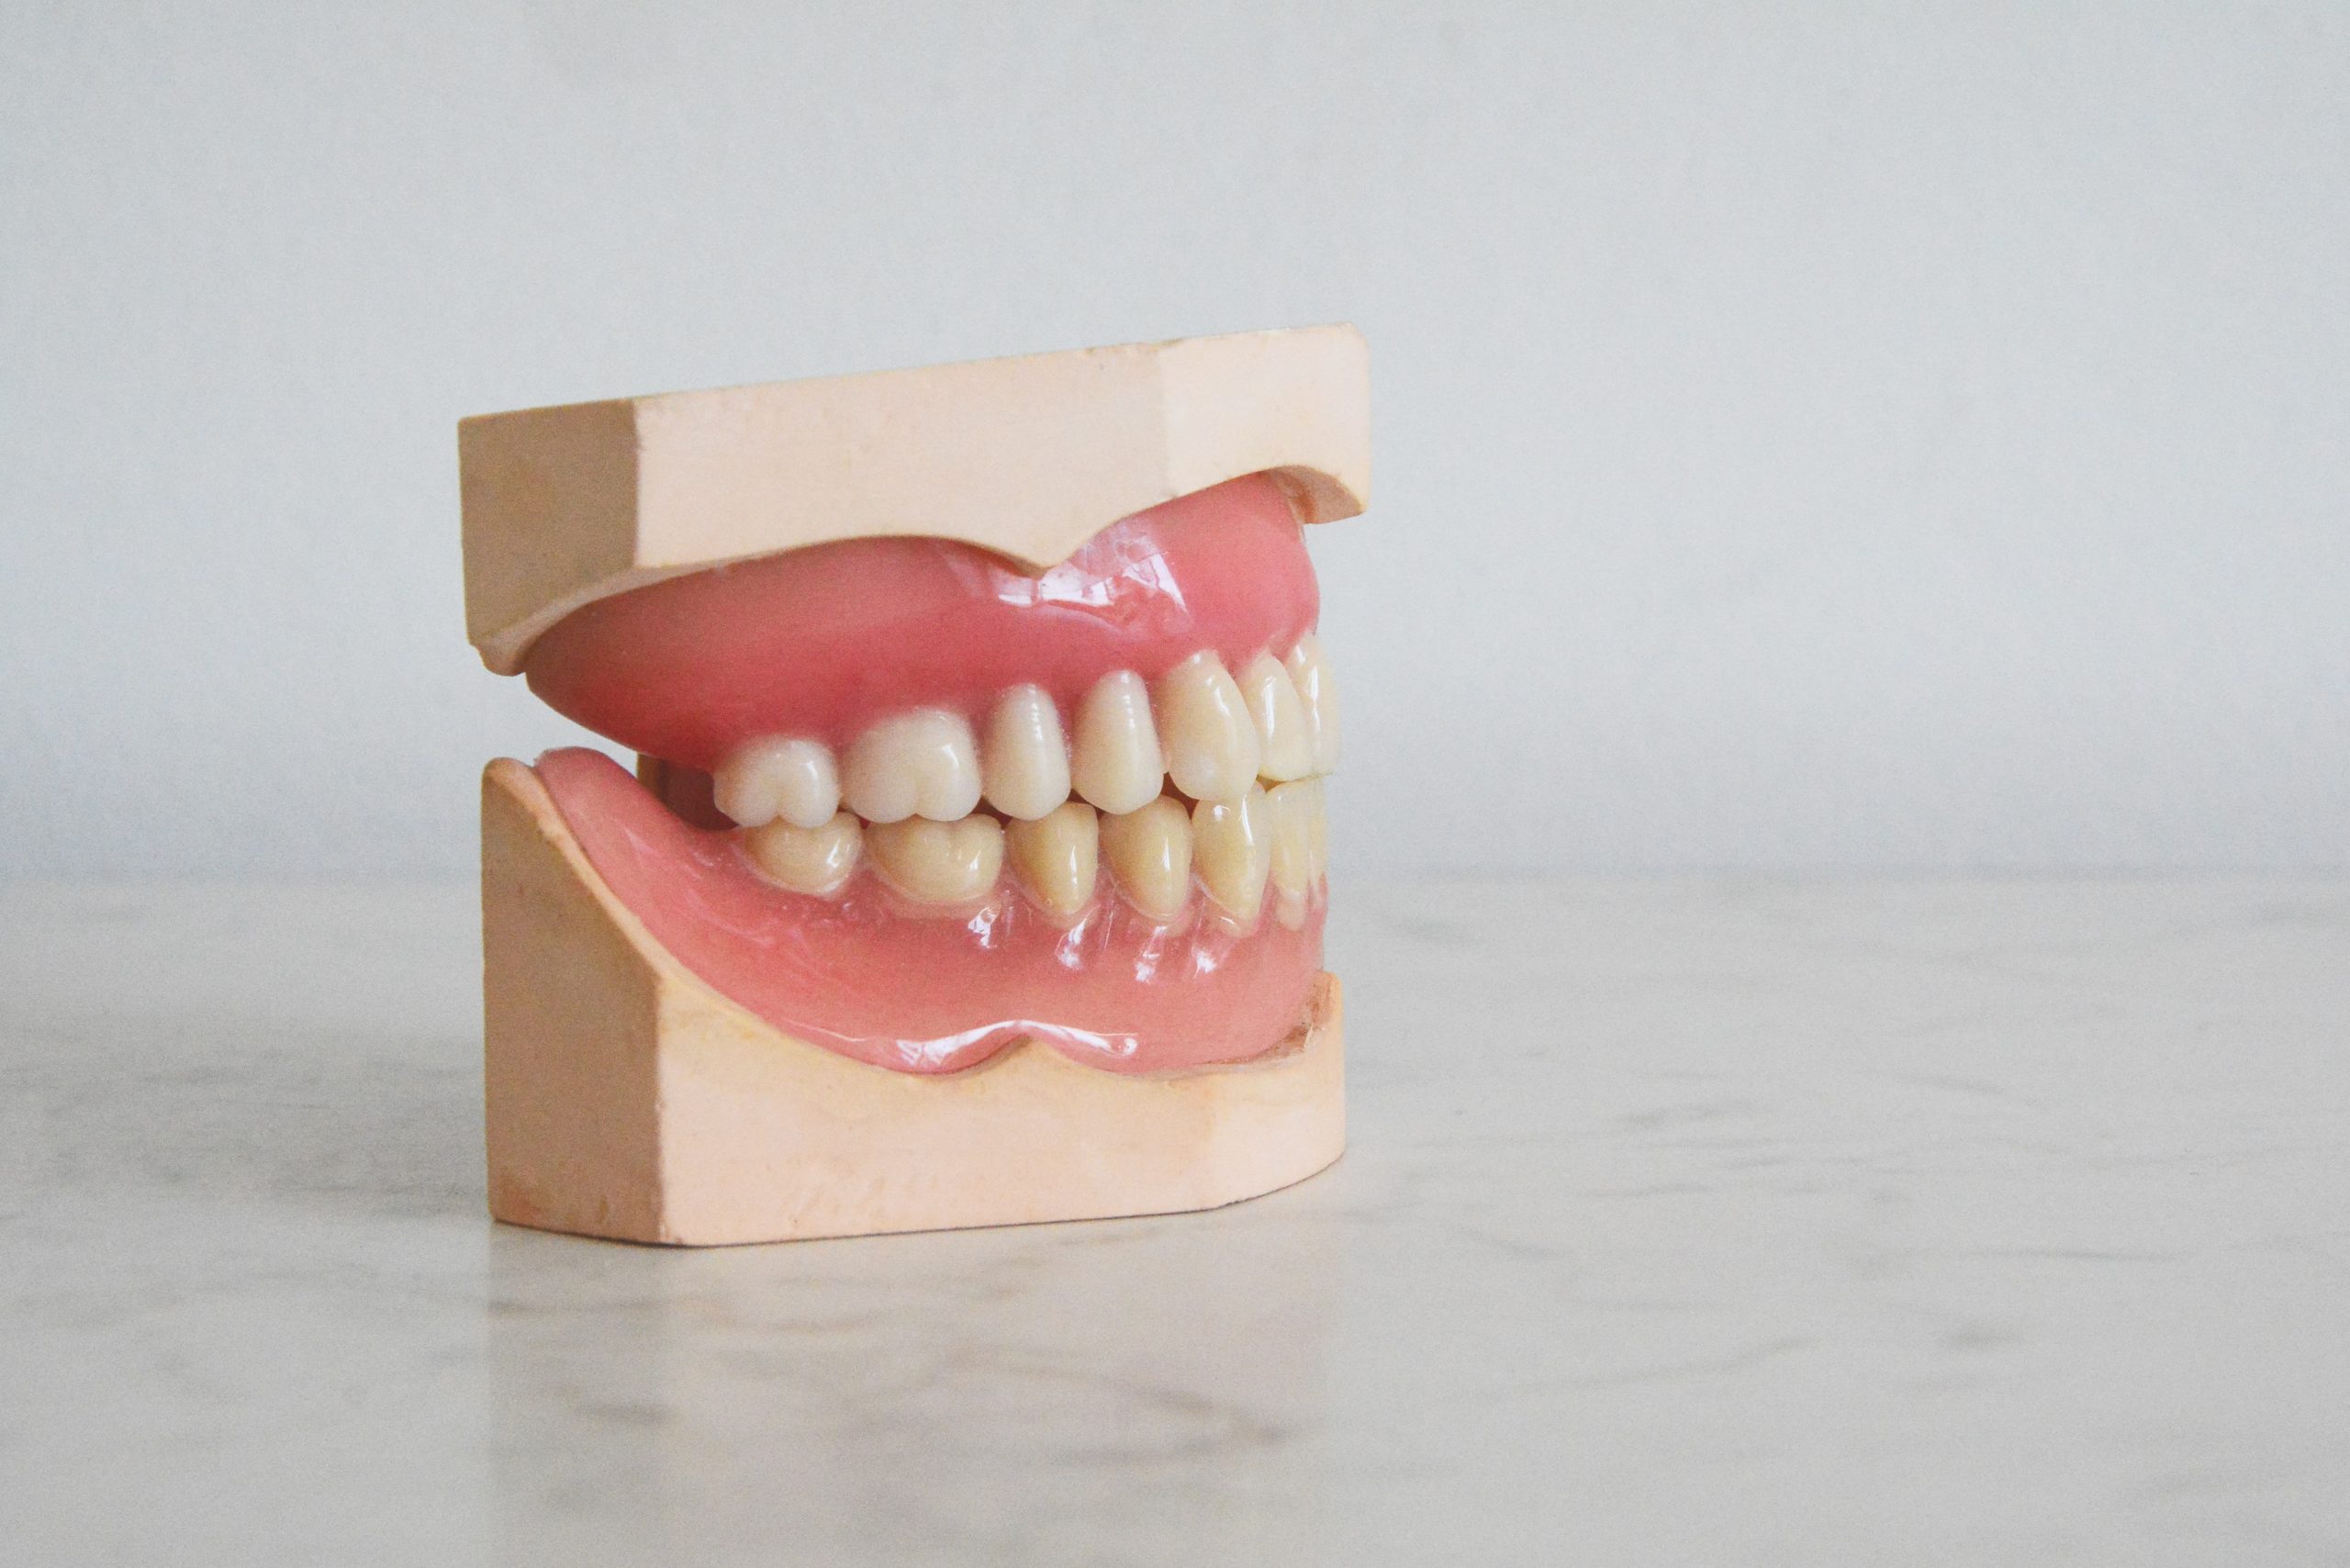 in an article about cavities, a model of human teeth